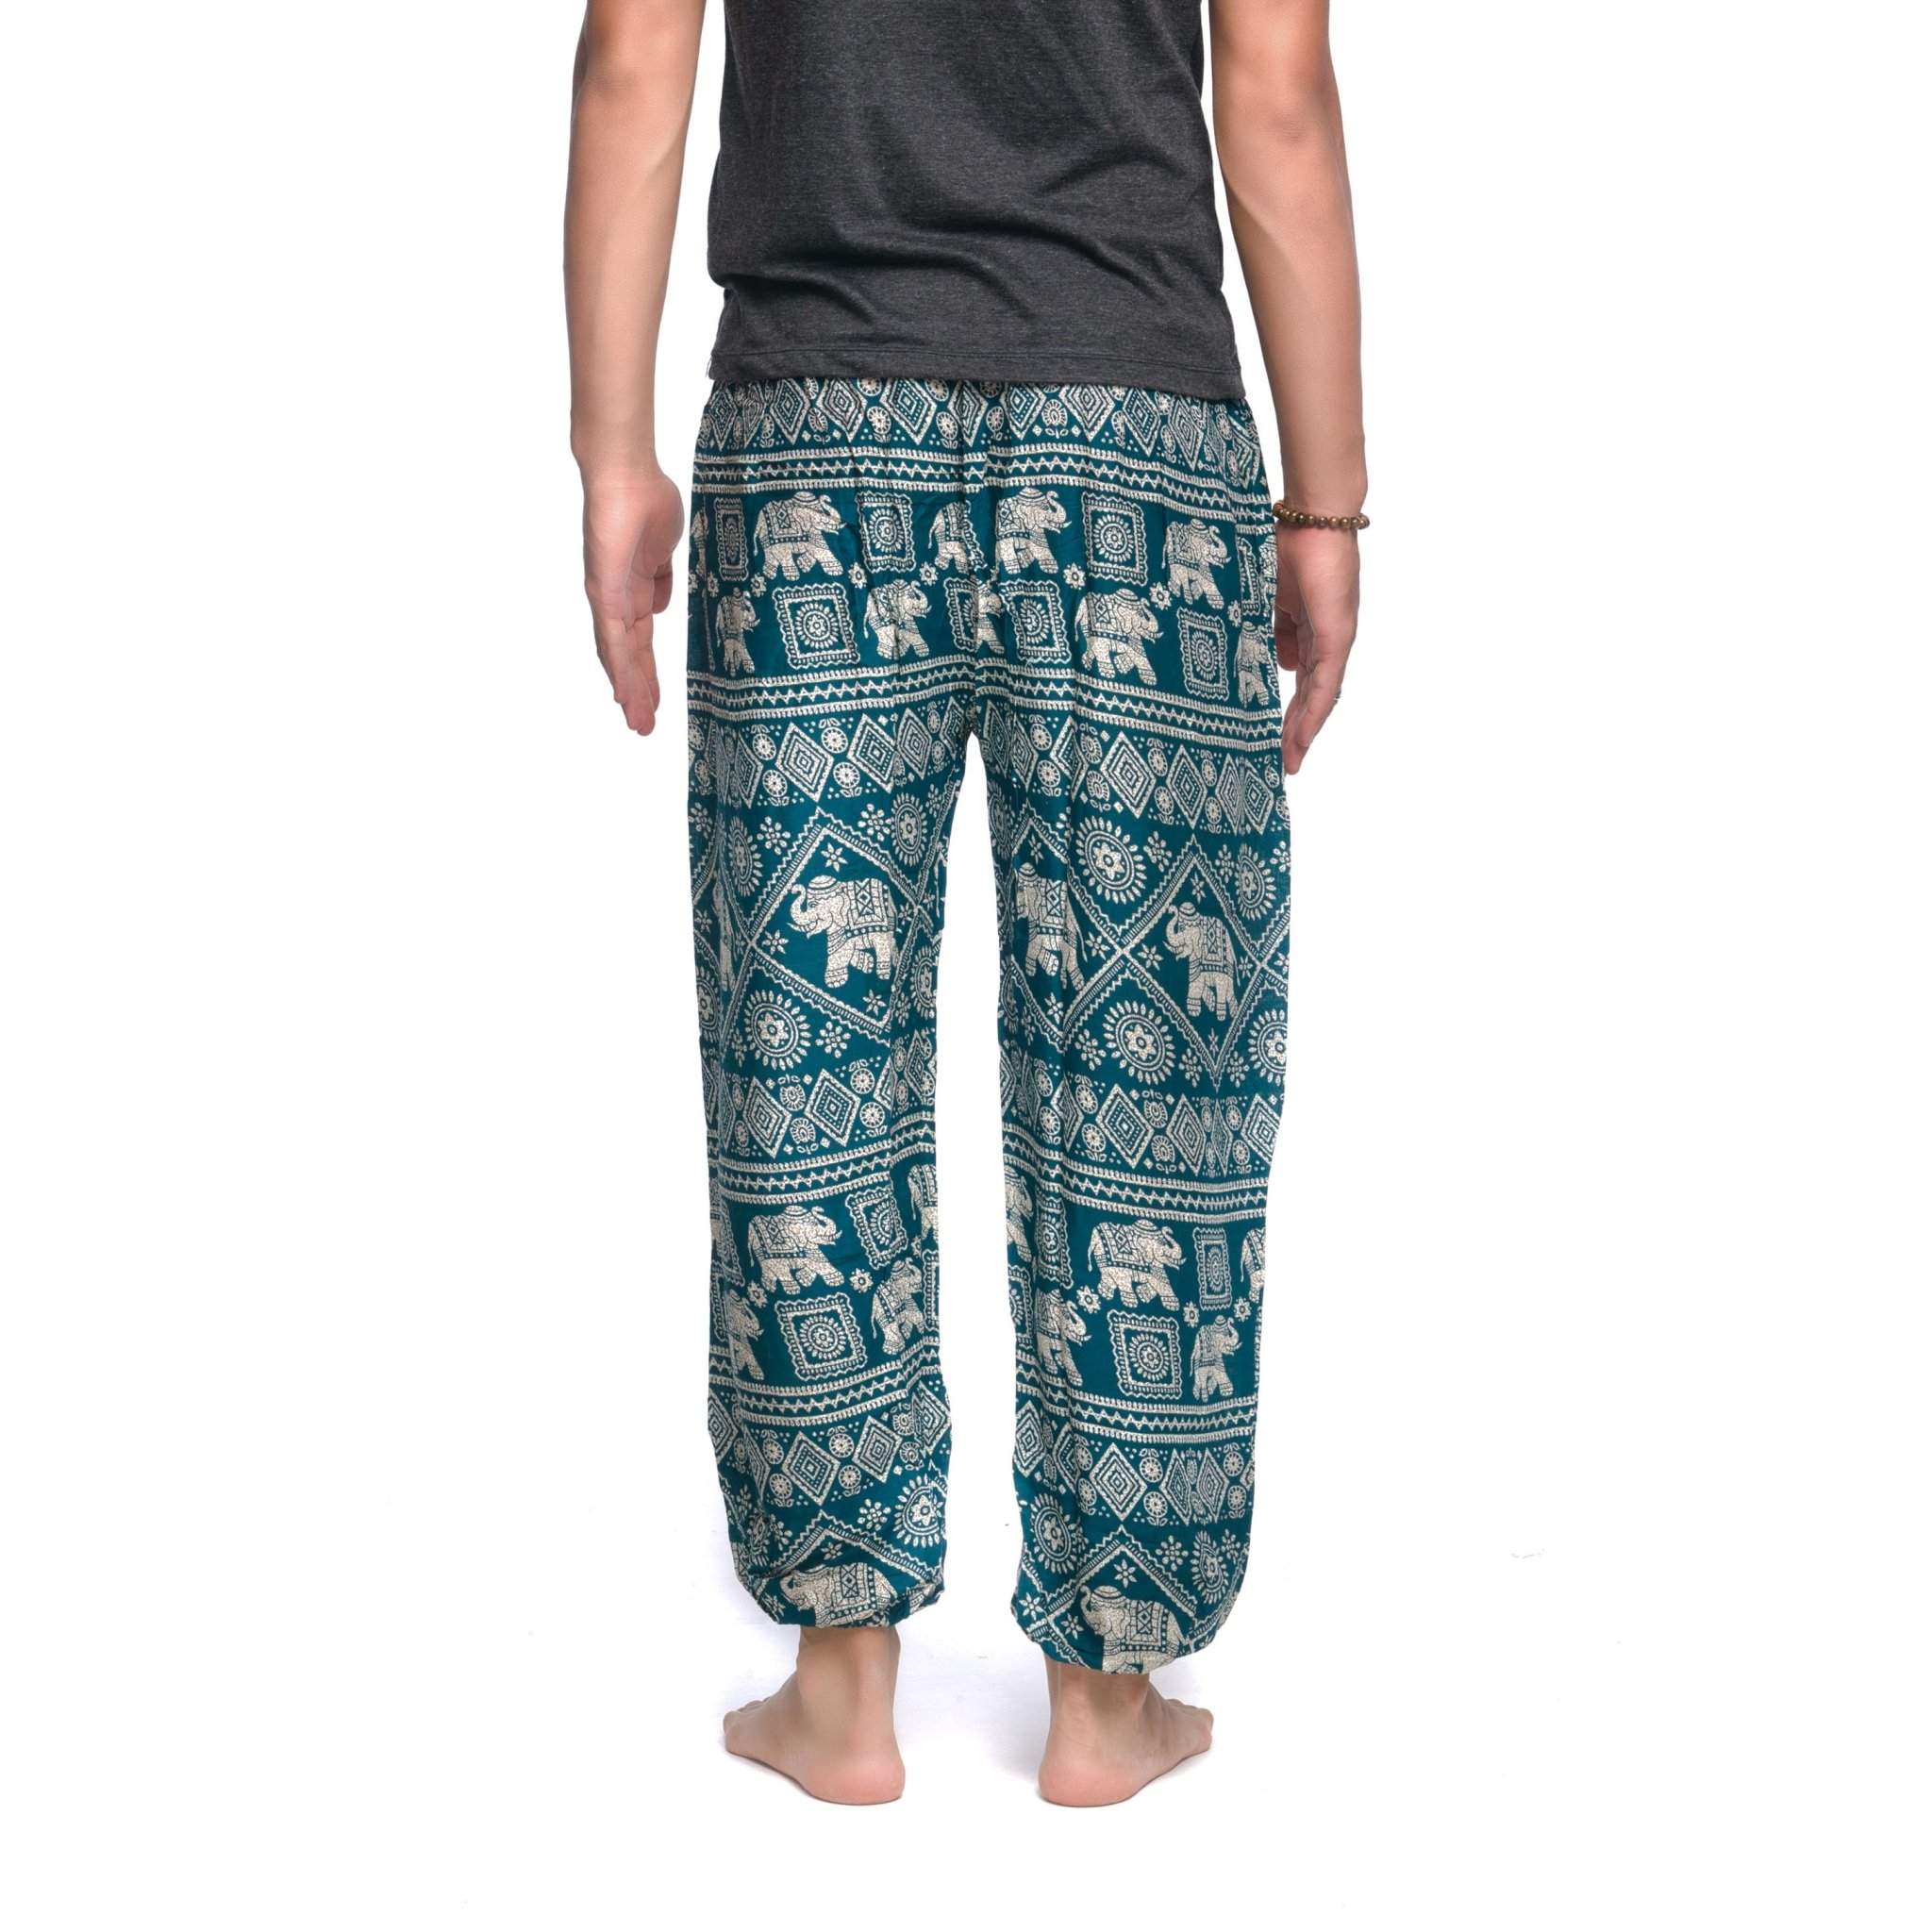 Agra Pants Elepanta Men's Pants - Buy Today Elephant Pants Jewelry And Bohemian Clothes Handmade In Thailand Help To Save The Elephants FairTrade And Vegan